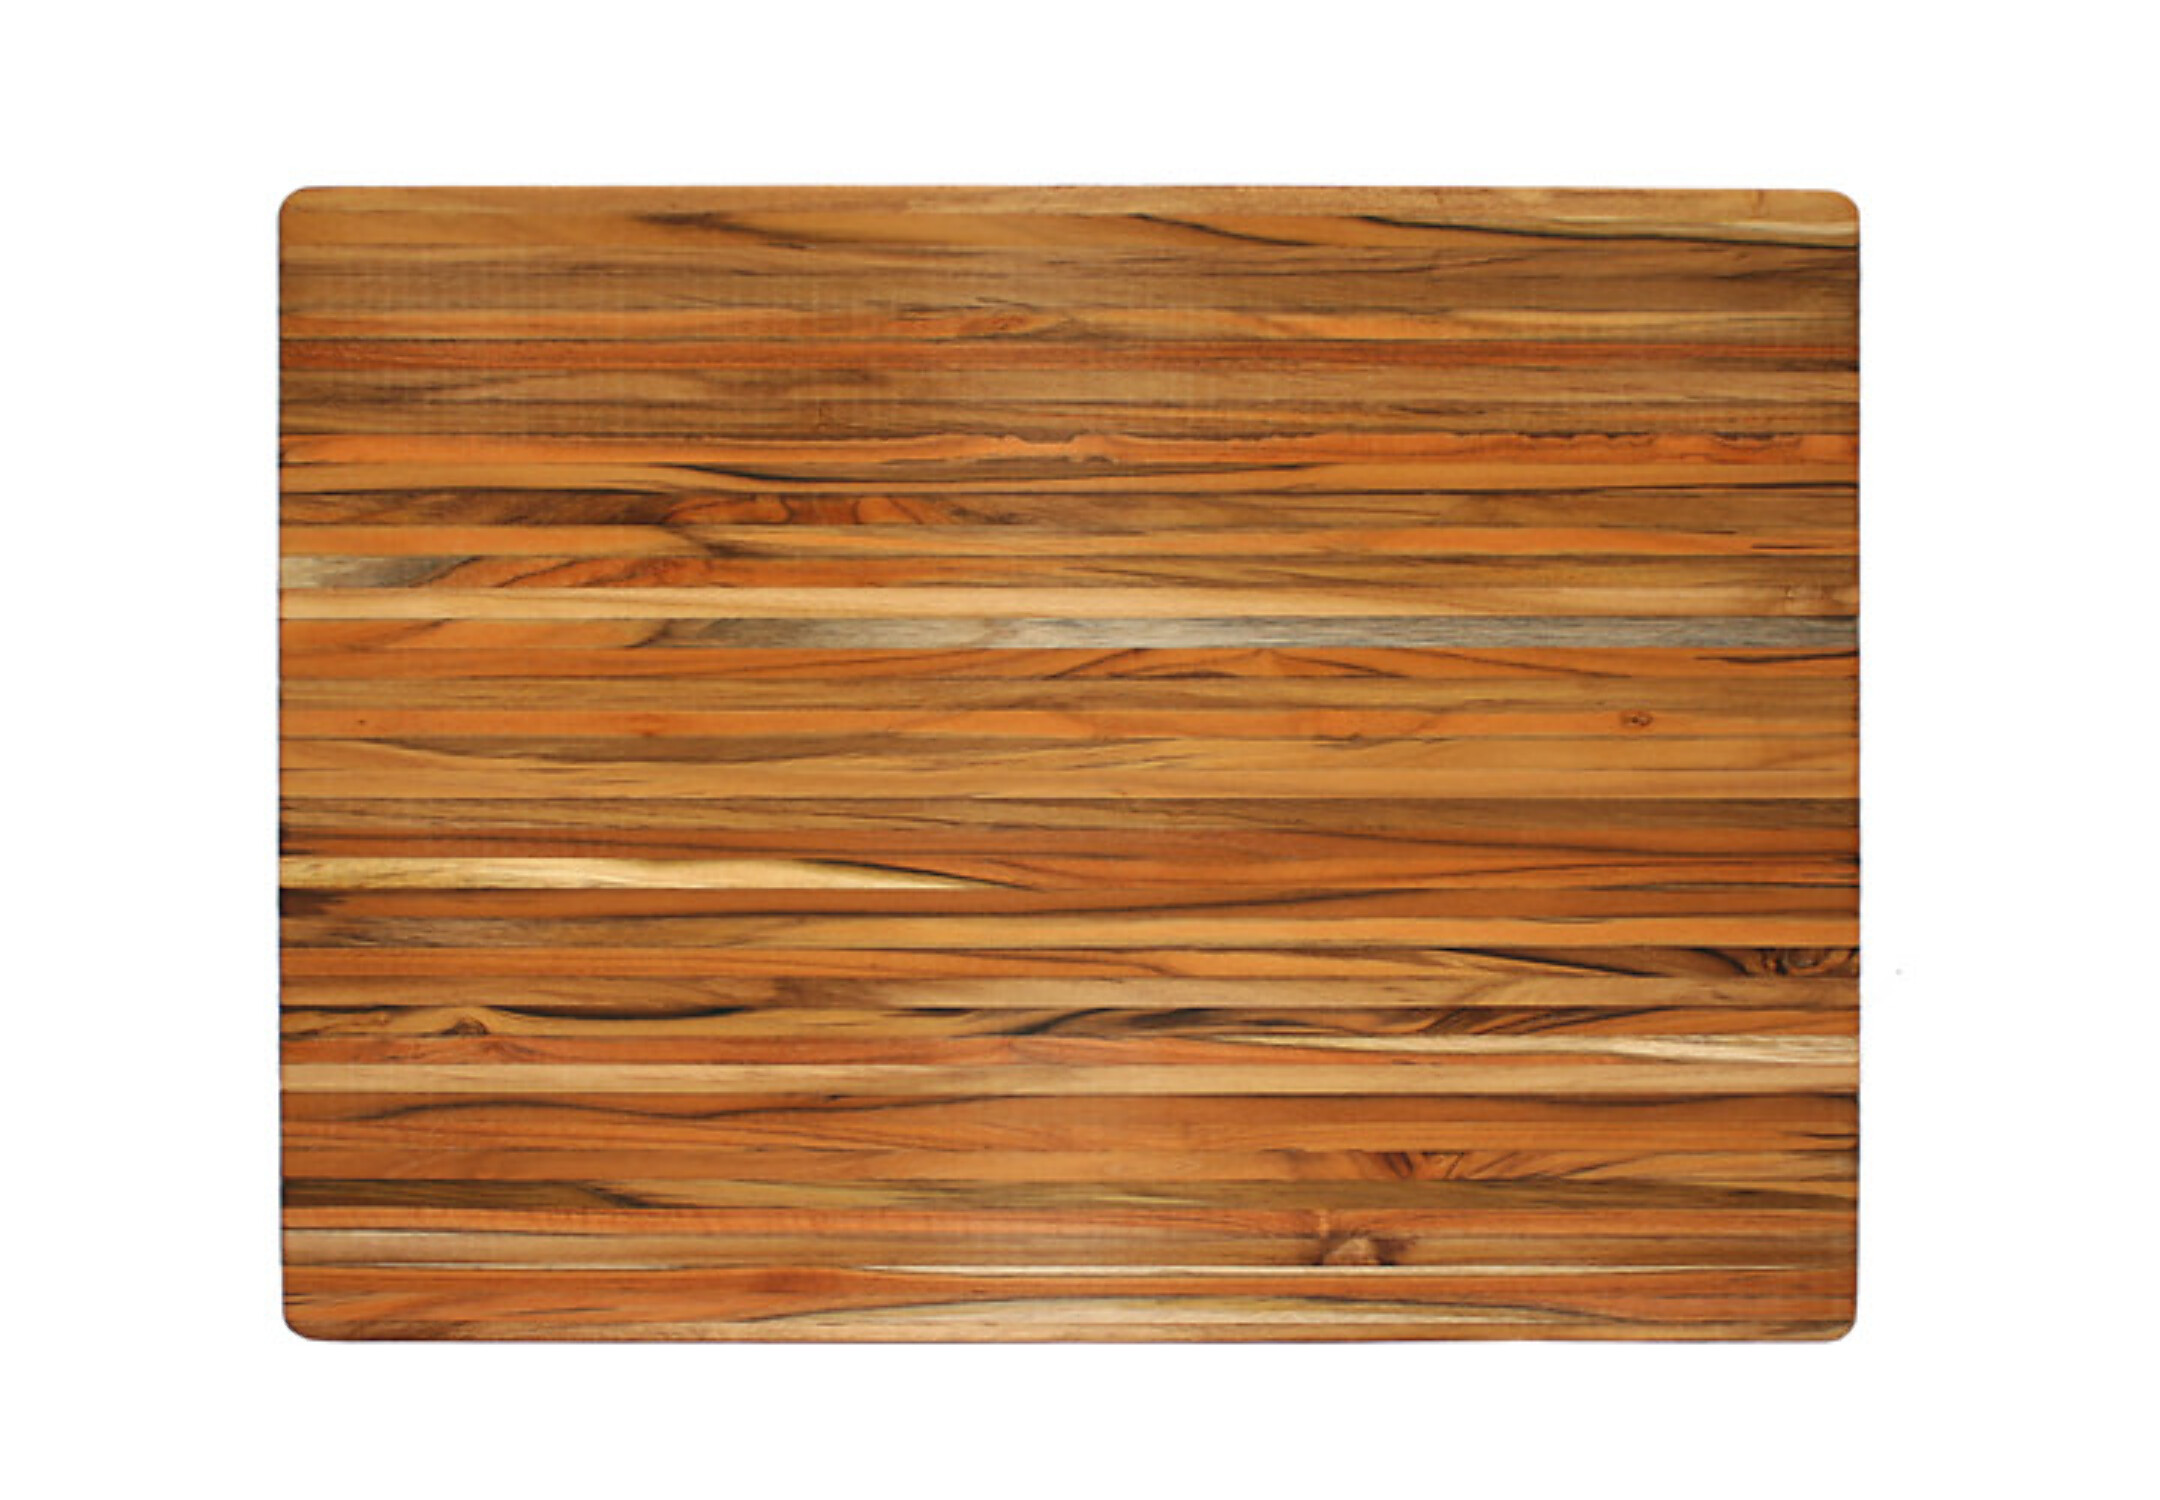 TeakHaus Edge Grain Carving Board w/Hand Grip (Rectangle) | 24" x 18" x 1.5" - image 2 of 6